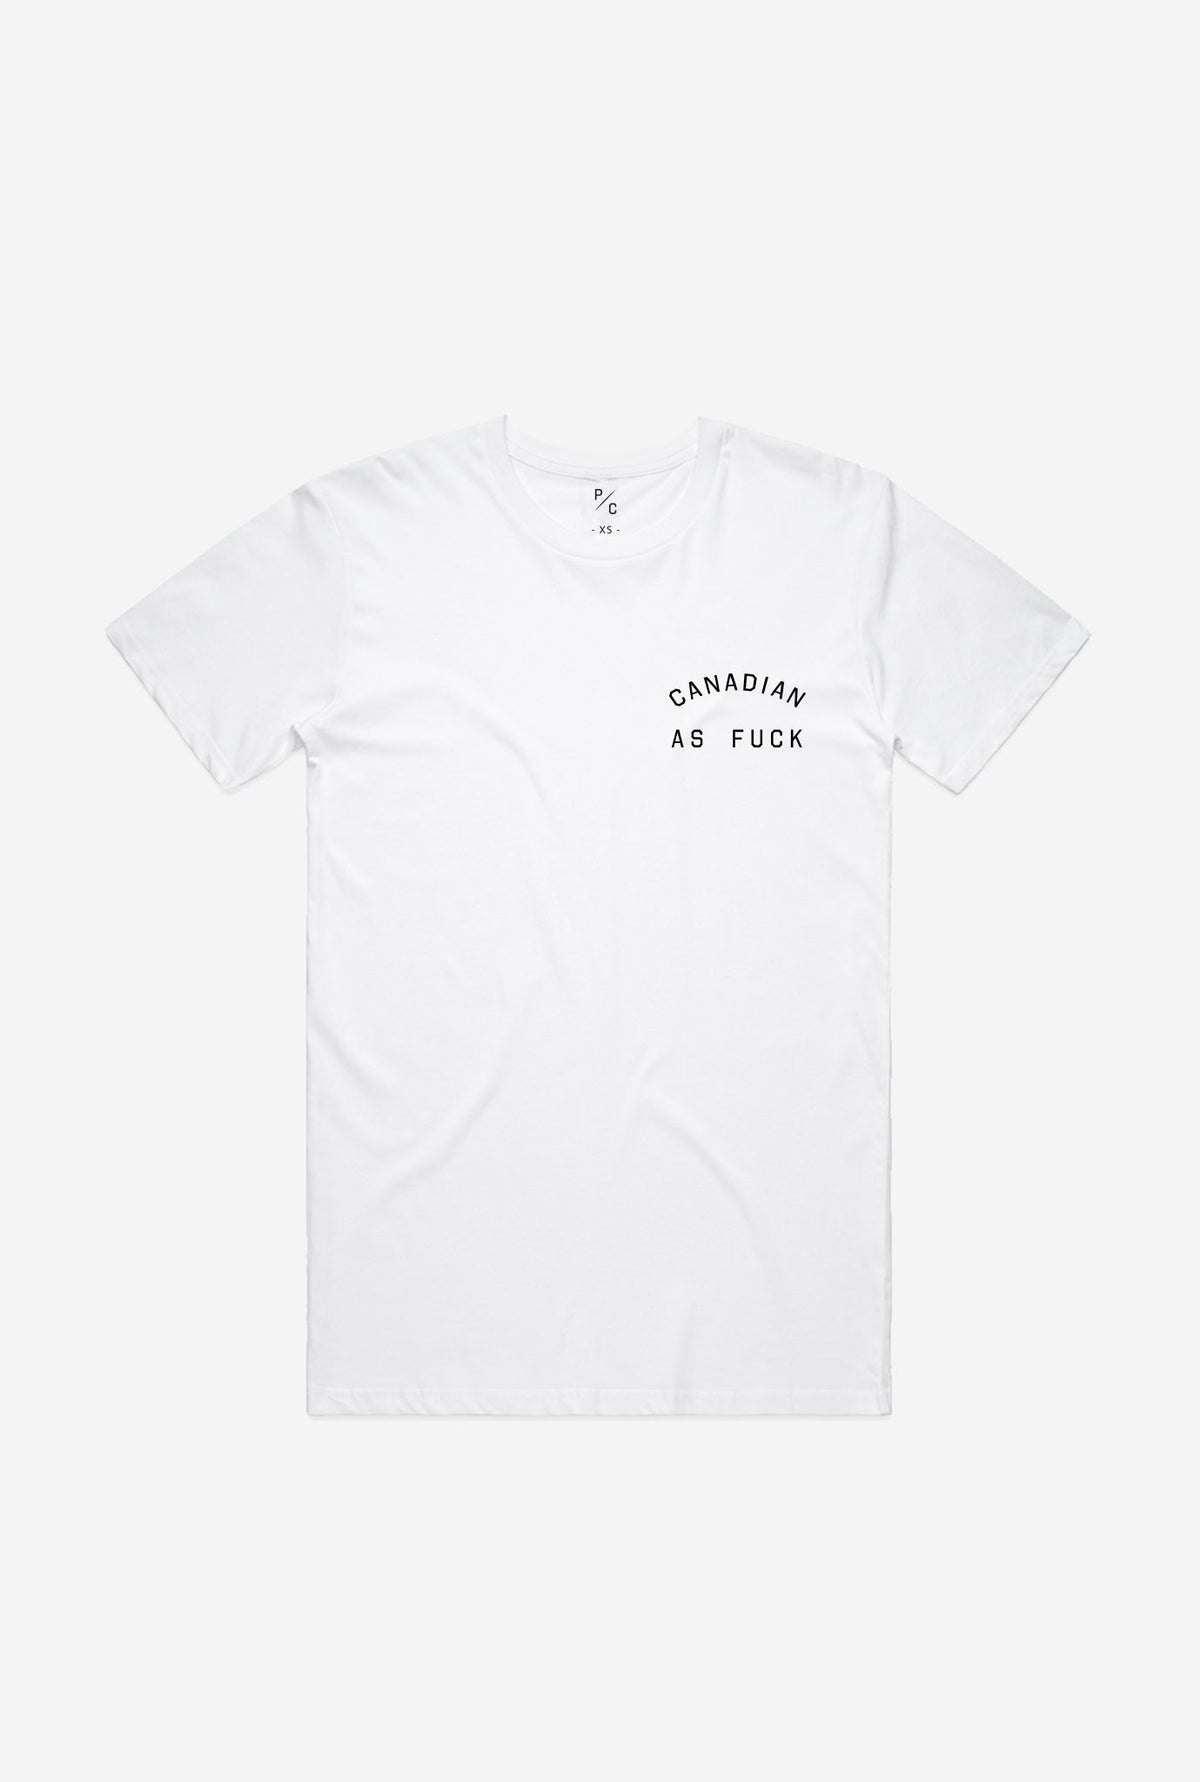 Canadian as Fuck T-Shirt - White